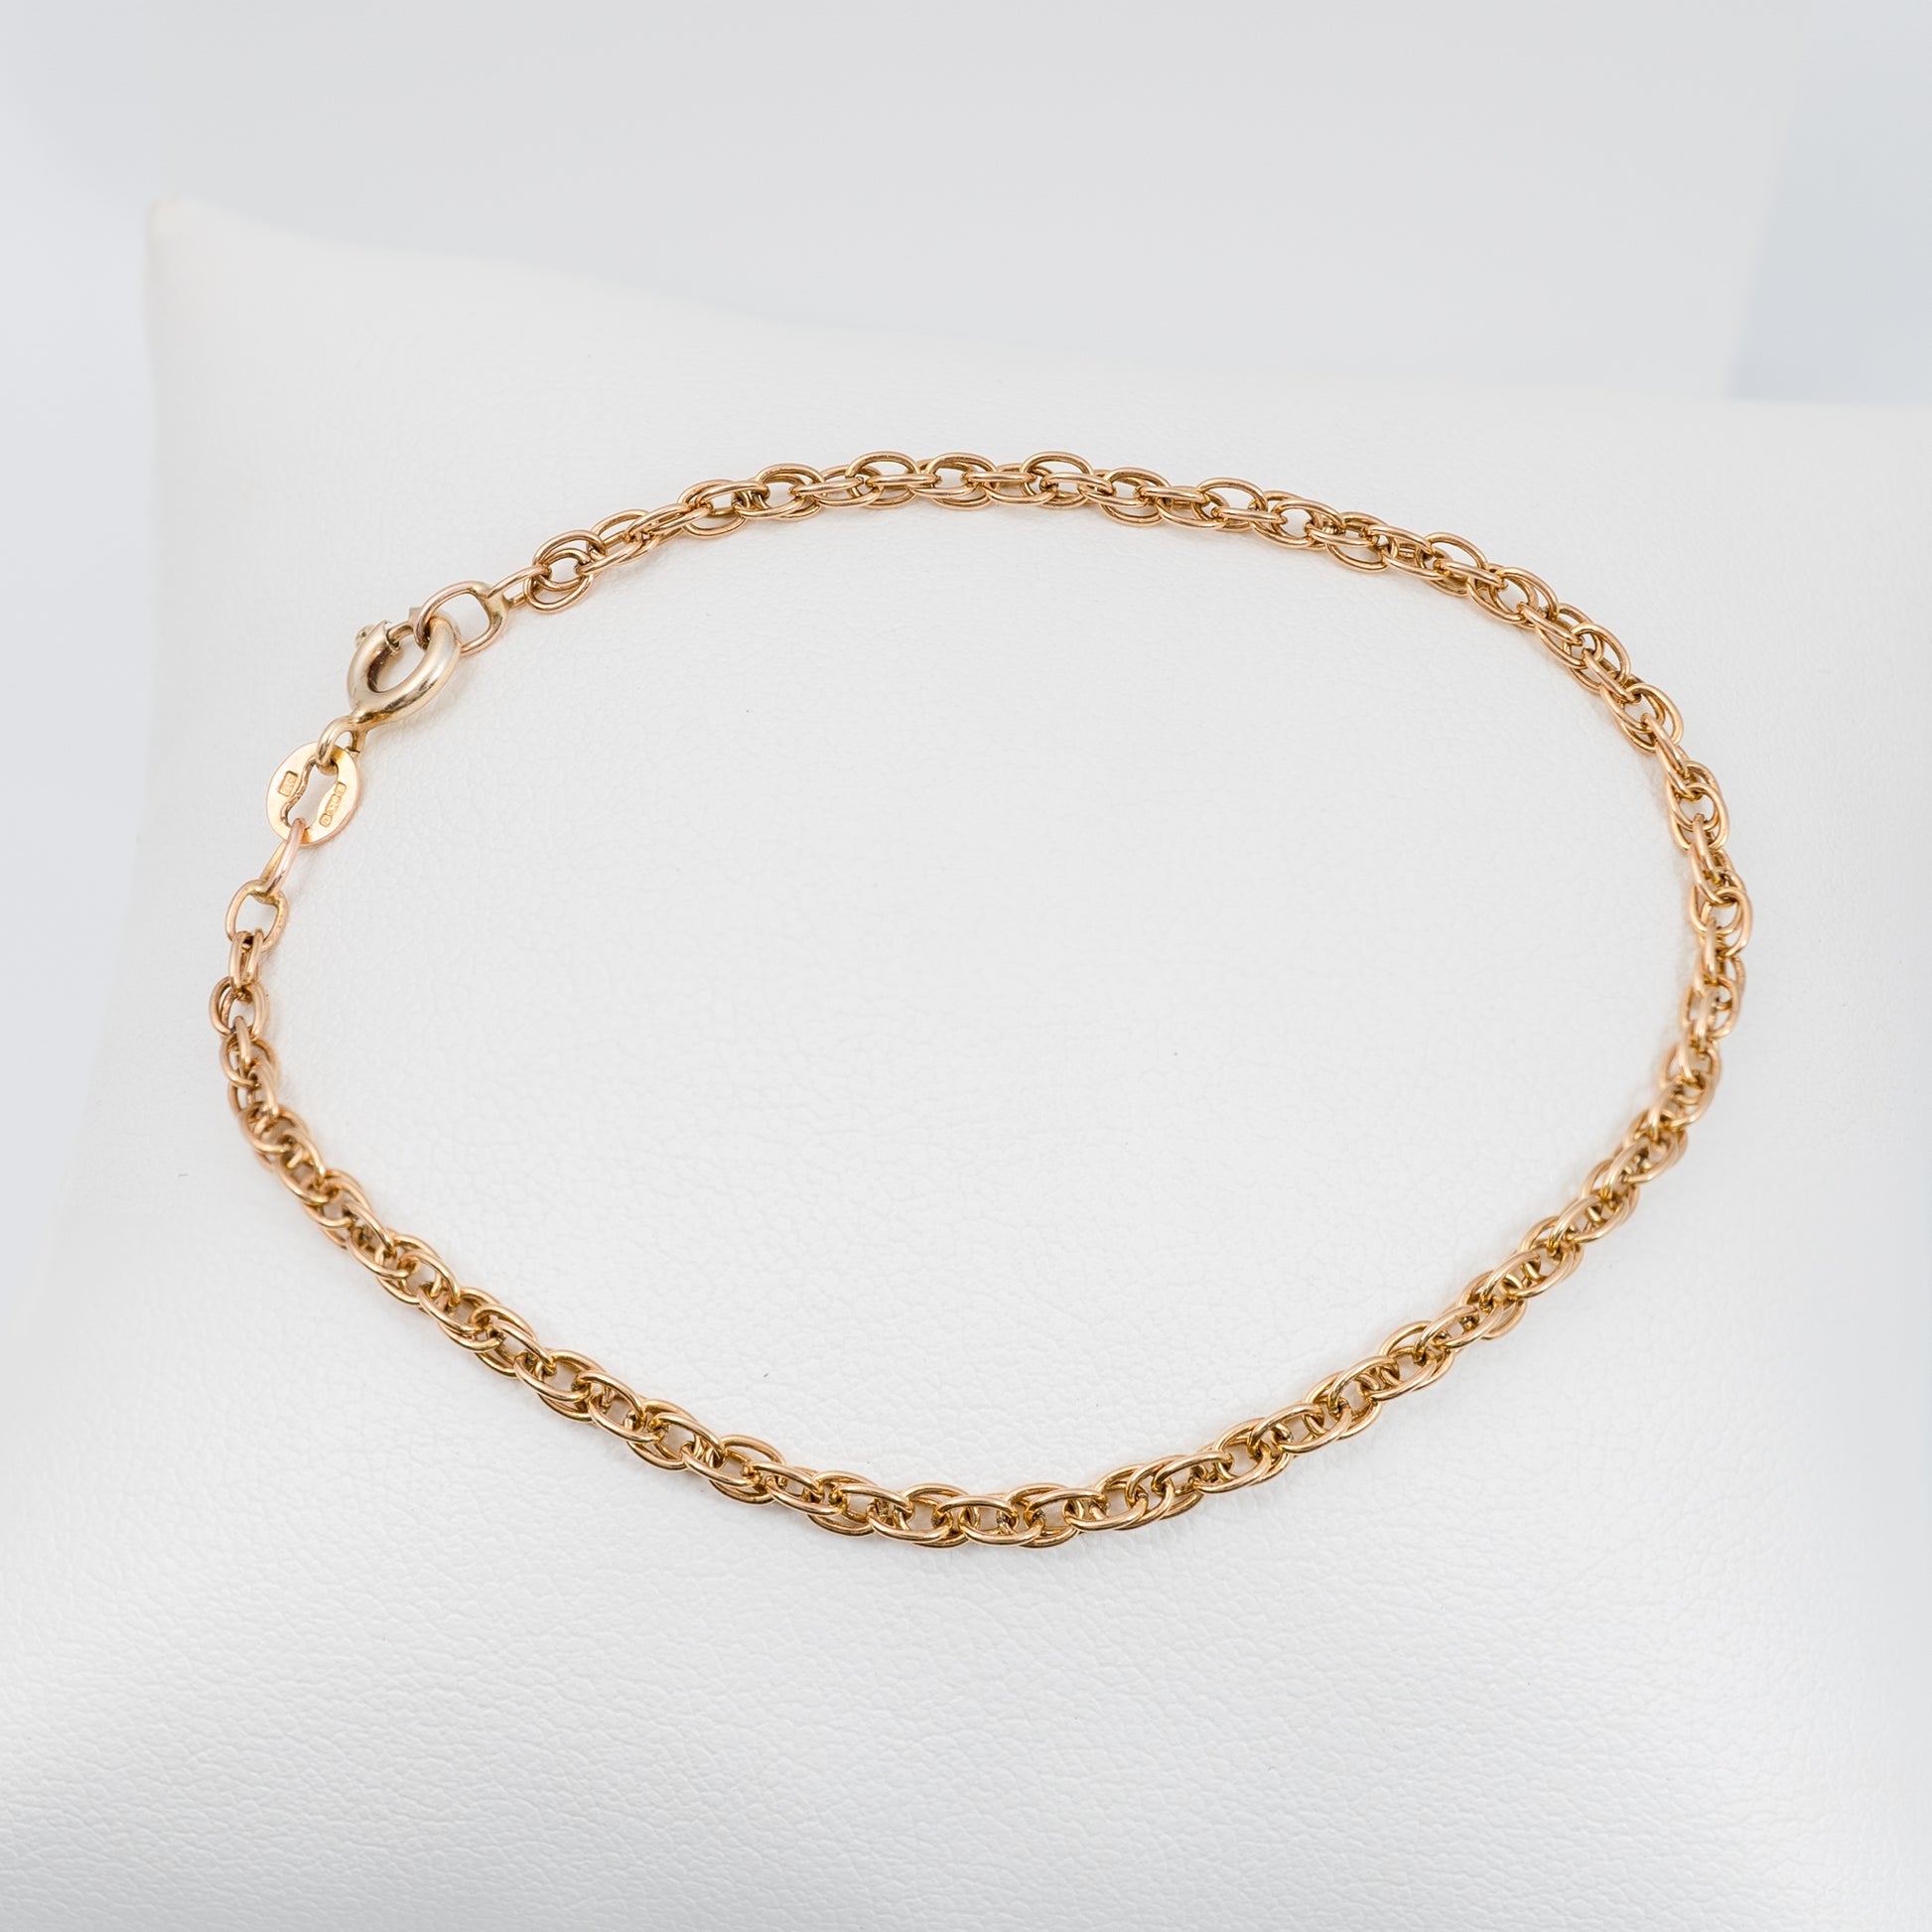 Chic Gold Chain Bracelet for Women - 7 inches